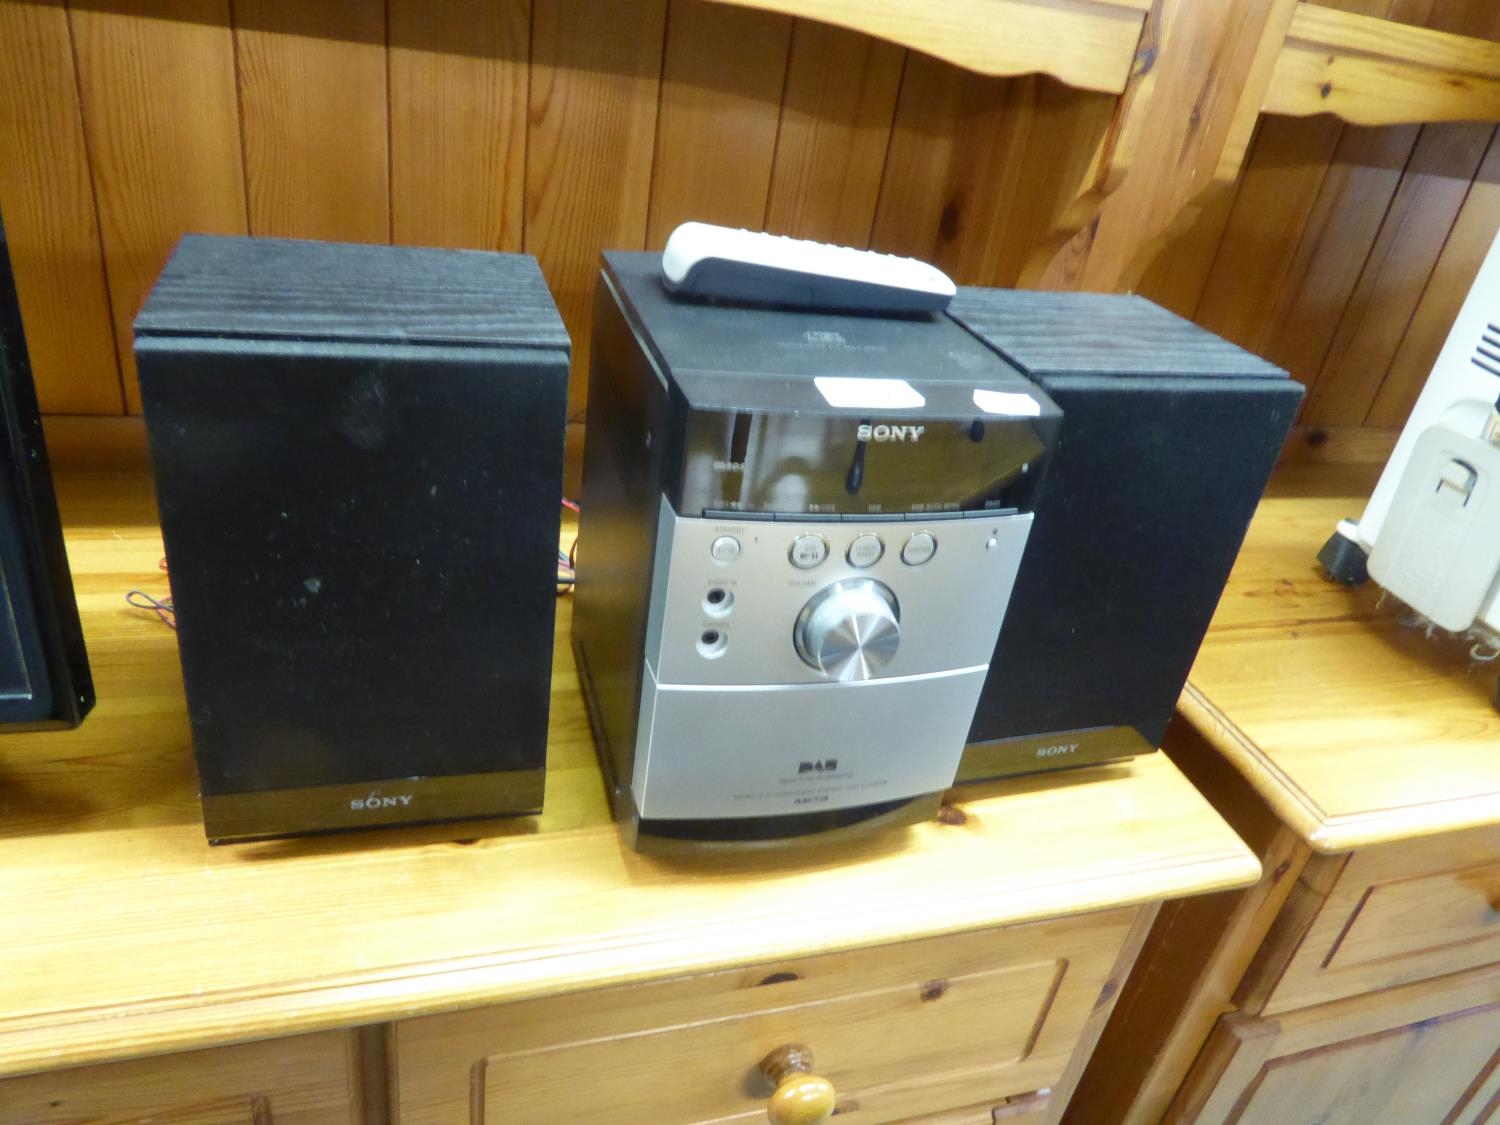 SONY DAB STEREO RADIO AND CD PLAYER WITH A PAIR OF LOUDSPEAKERS, WITH REMOTE CONTROL